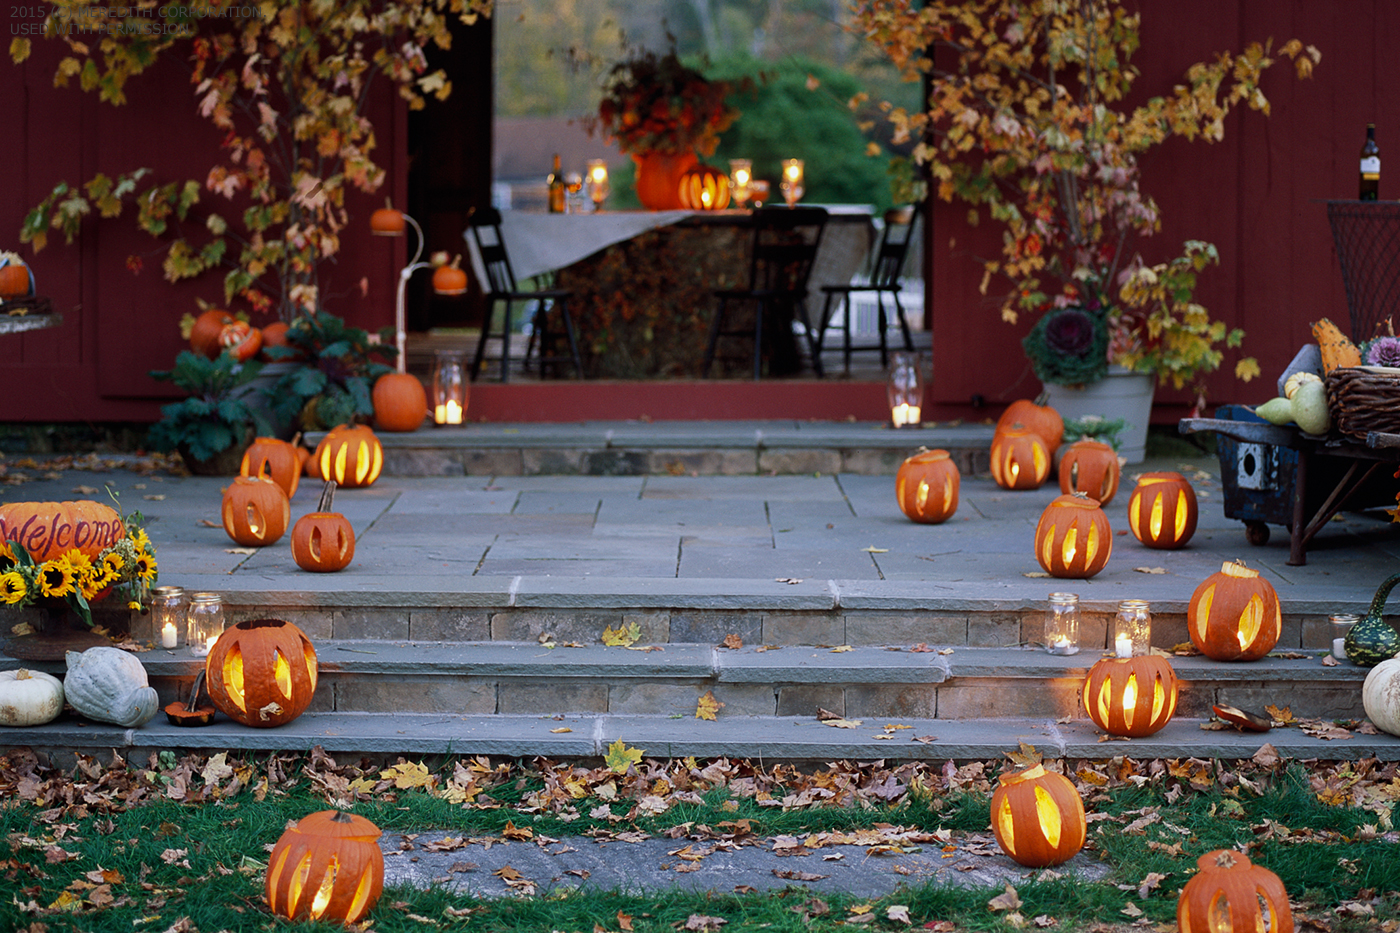 How to Host a Fall Backyard Party - bhgrelife.com